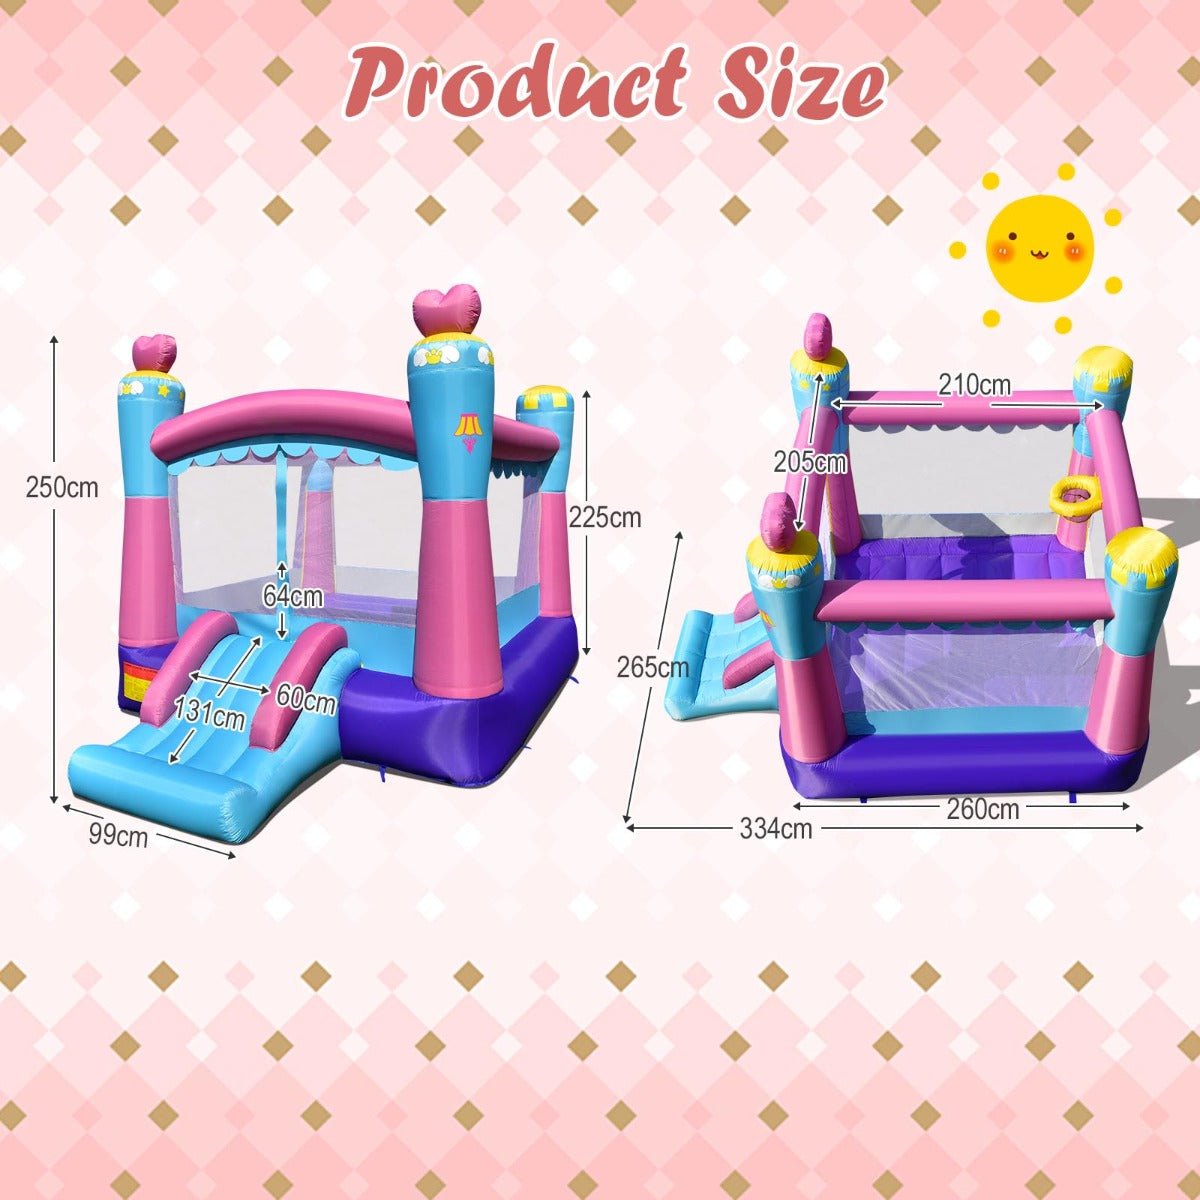 Kids Princess Theme Inflatable Castle - Whimsical Jumping and Play